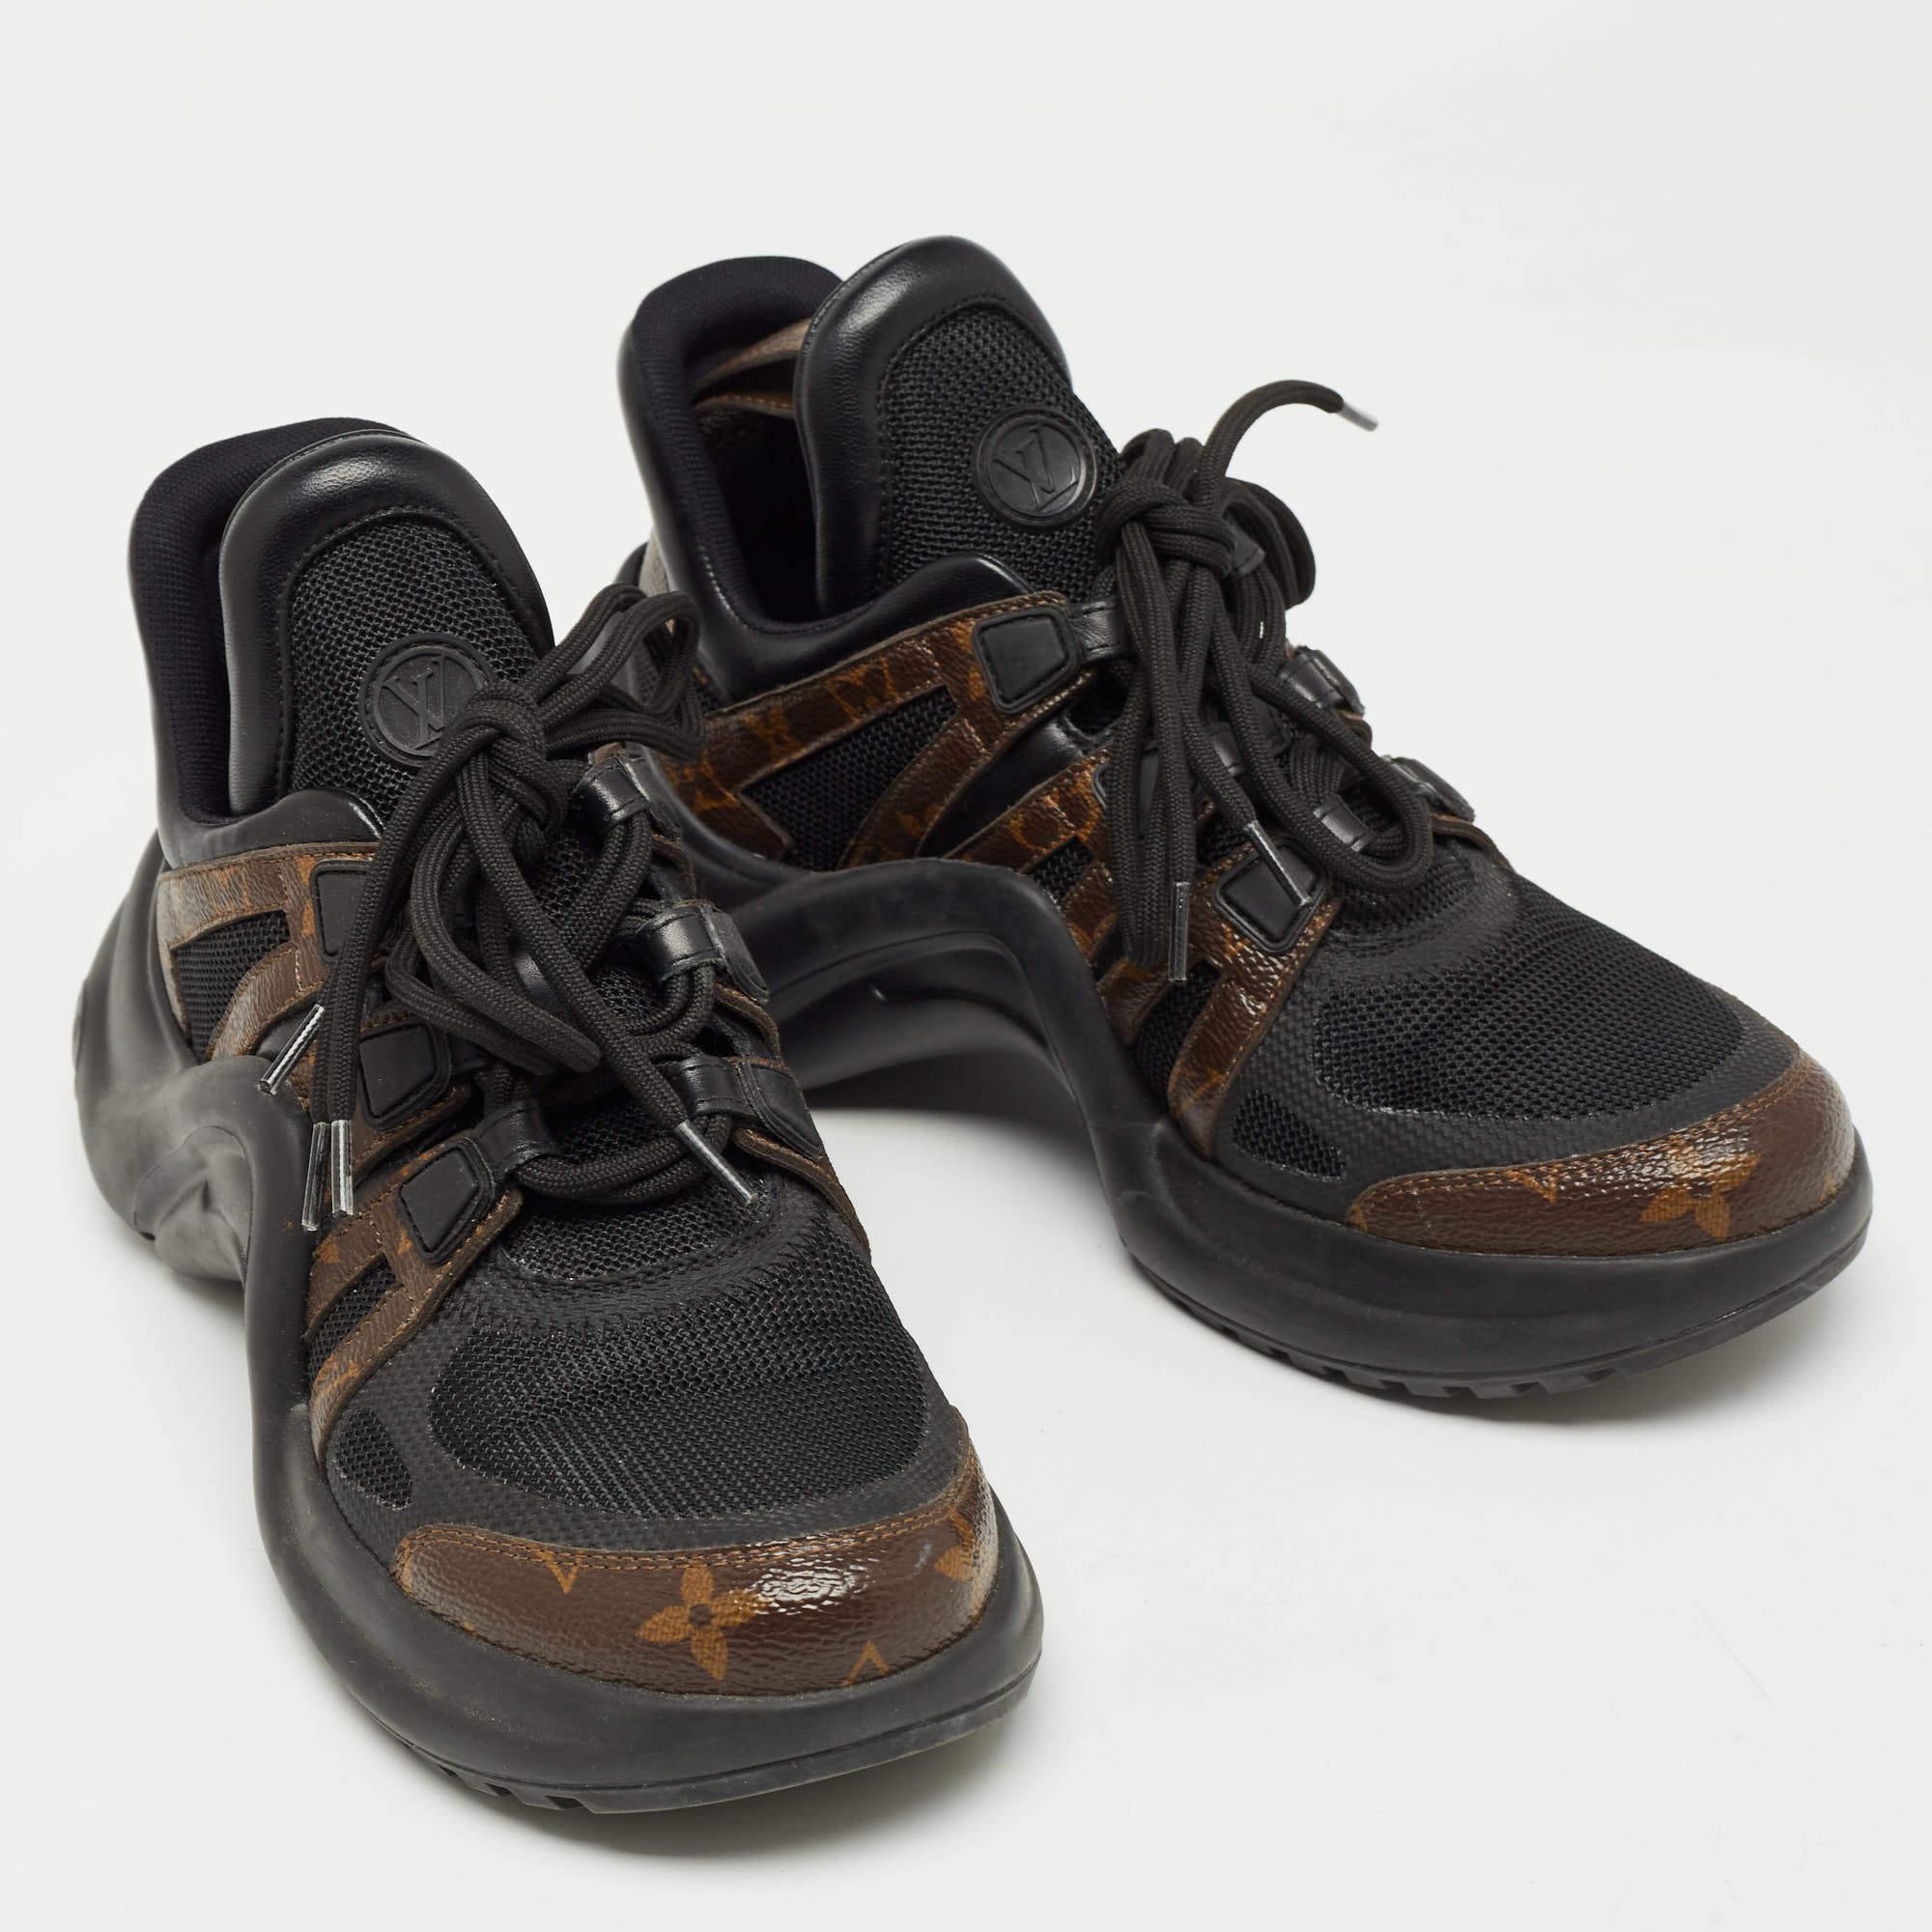 Louis Vuitton Black/Brown Mesh and Monogram Canvas Archlight Sneakers Size 38 For Sale 4